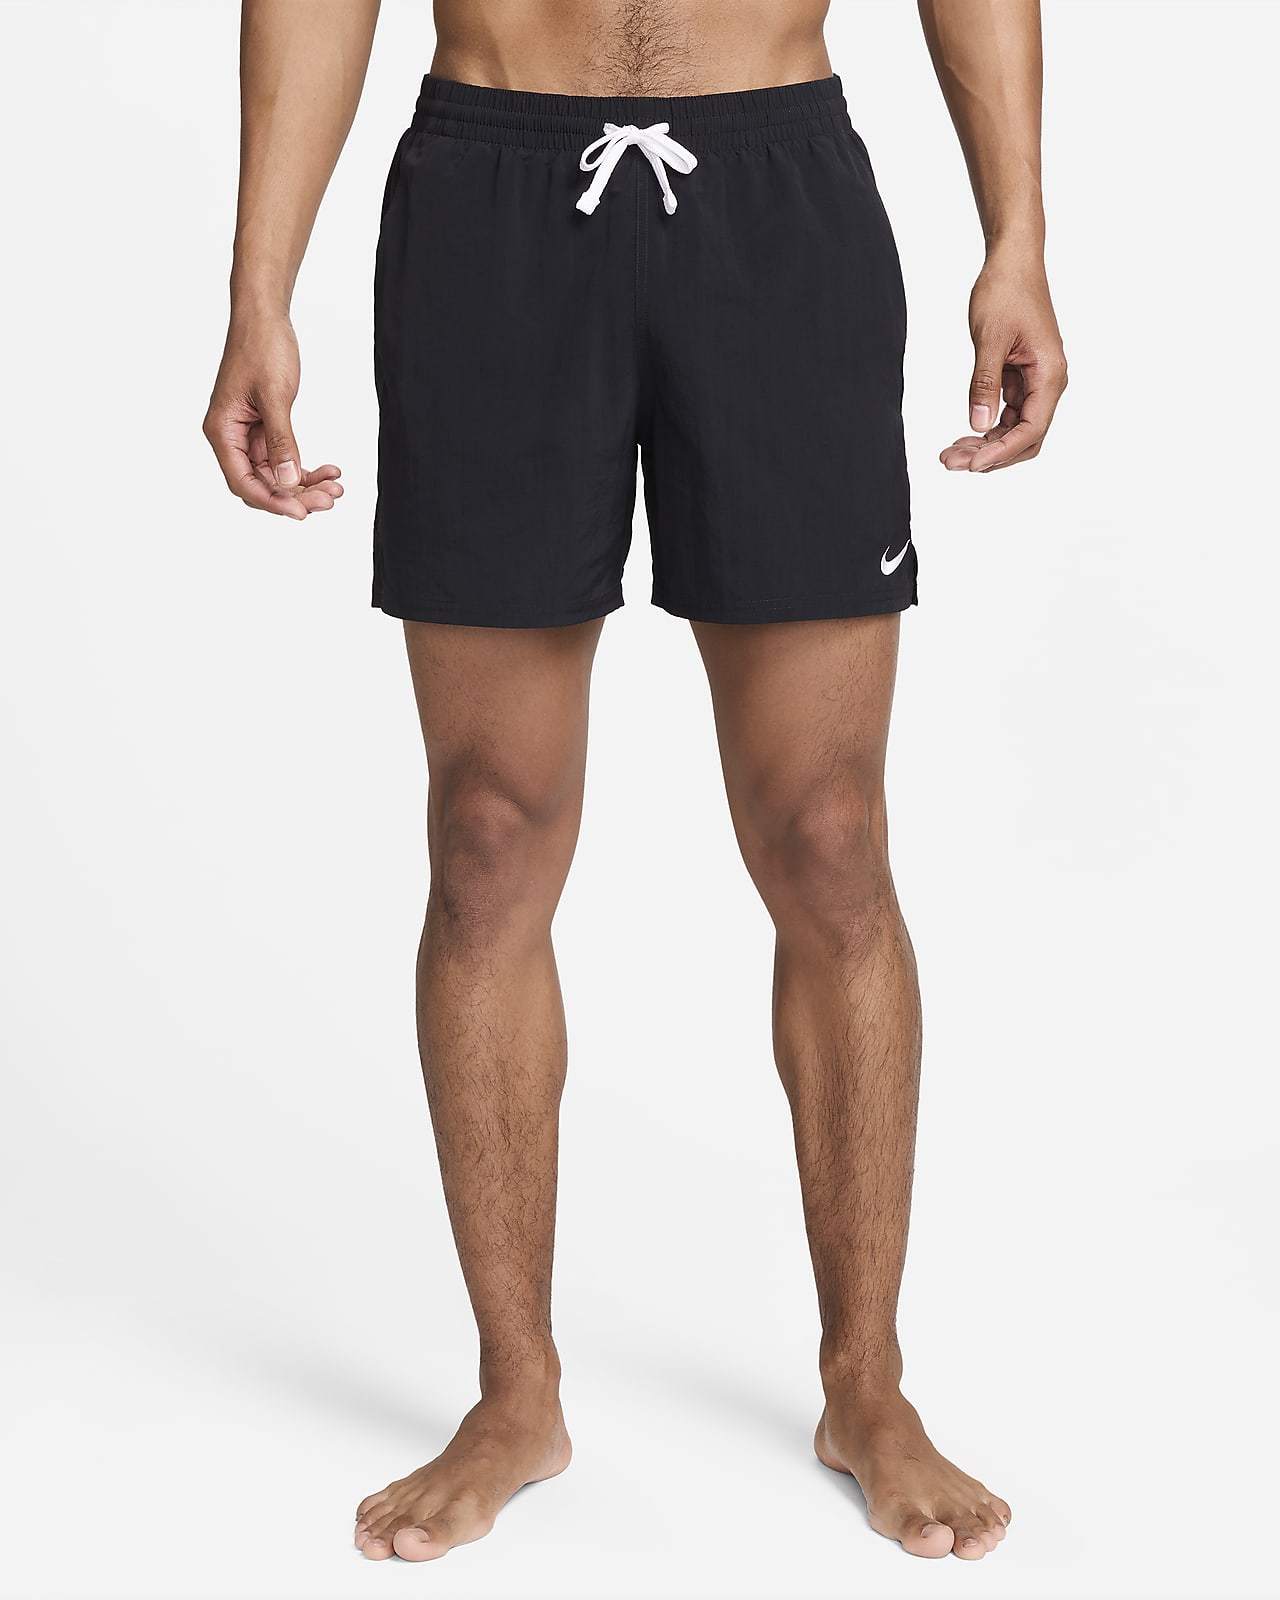 Nike Swimming Volley 5 inch shorts in black